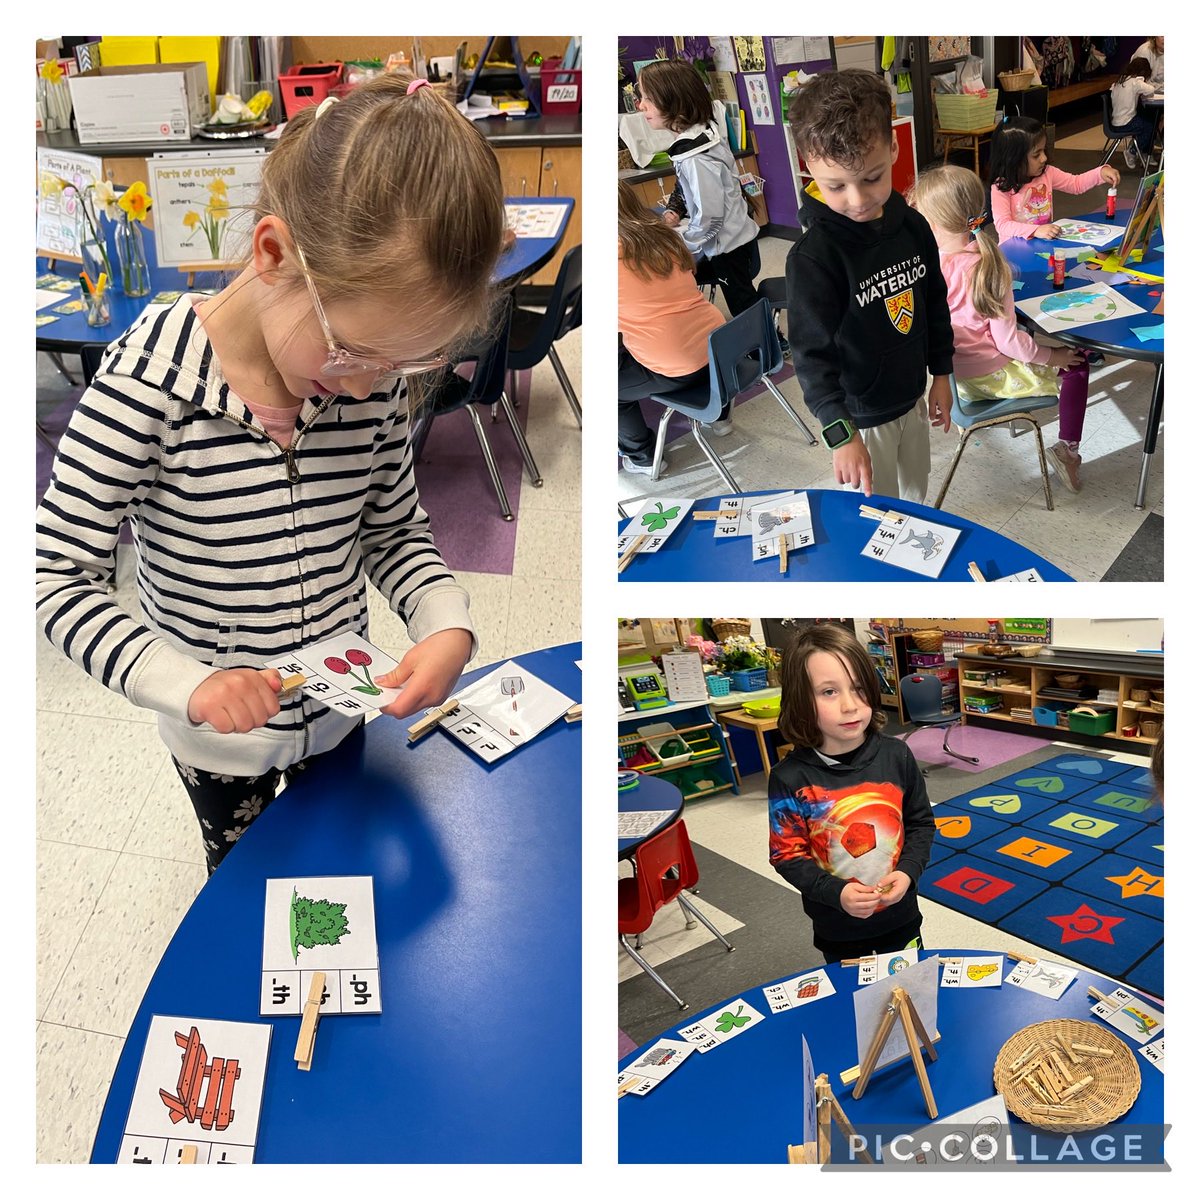 Reviewing digraphs by matching pictures to the corresponding digraphs: sh/ch/th ⁦@MmeJulieBell⁩ ⁦@msekinderland⁩ ⁦@mrsmcintyre1m⁩ ⁦@orellana_ivett⁩ ⁦@mrs_shaw33⁩